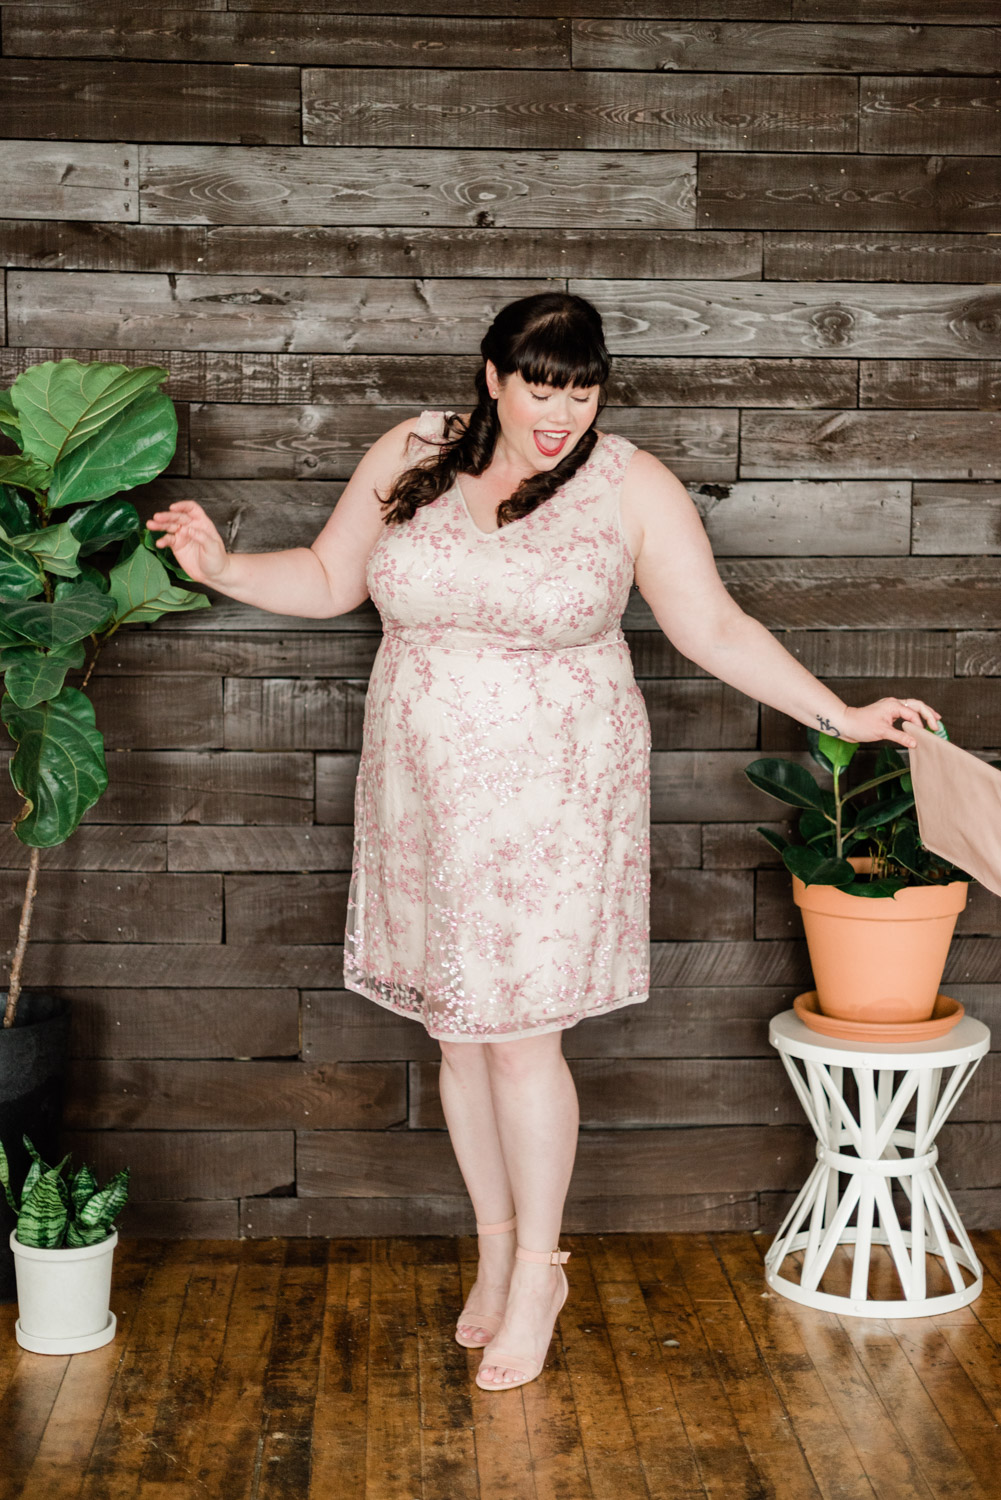 Plus Size Formal Gowns, Macy's, Style Plus Curves, Amber McCulloch, Plus Size Model, Plus Size Blogger, Adrianna Papell